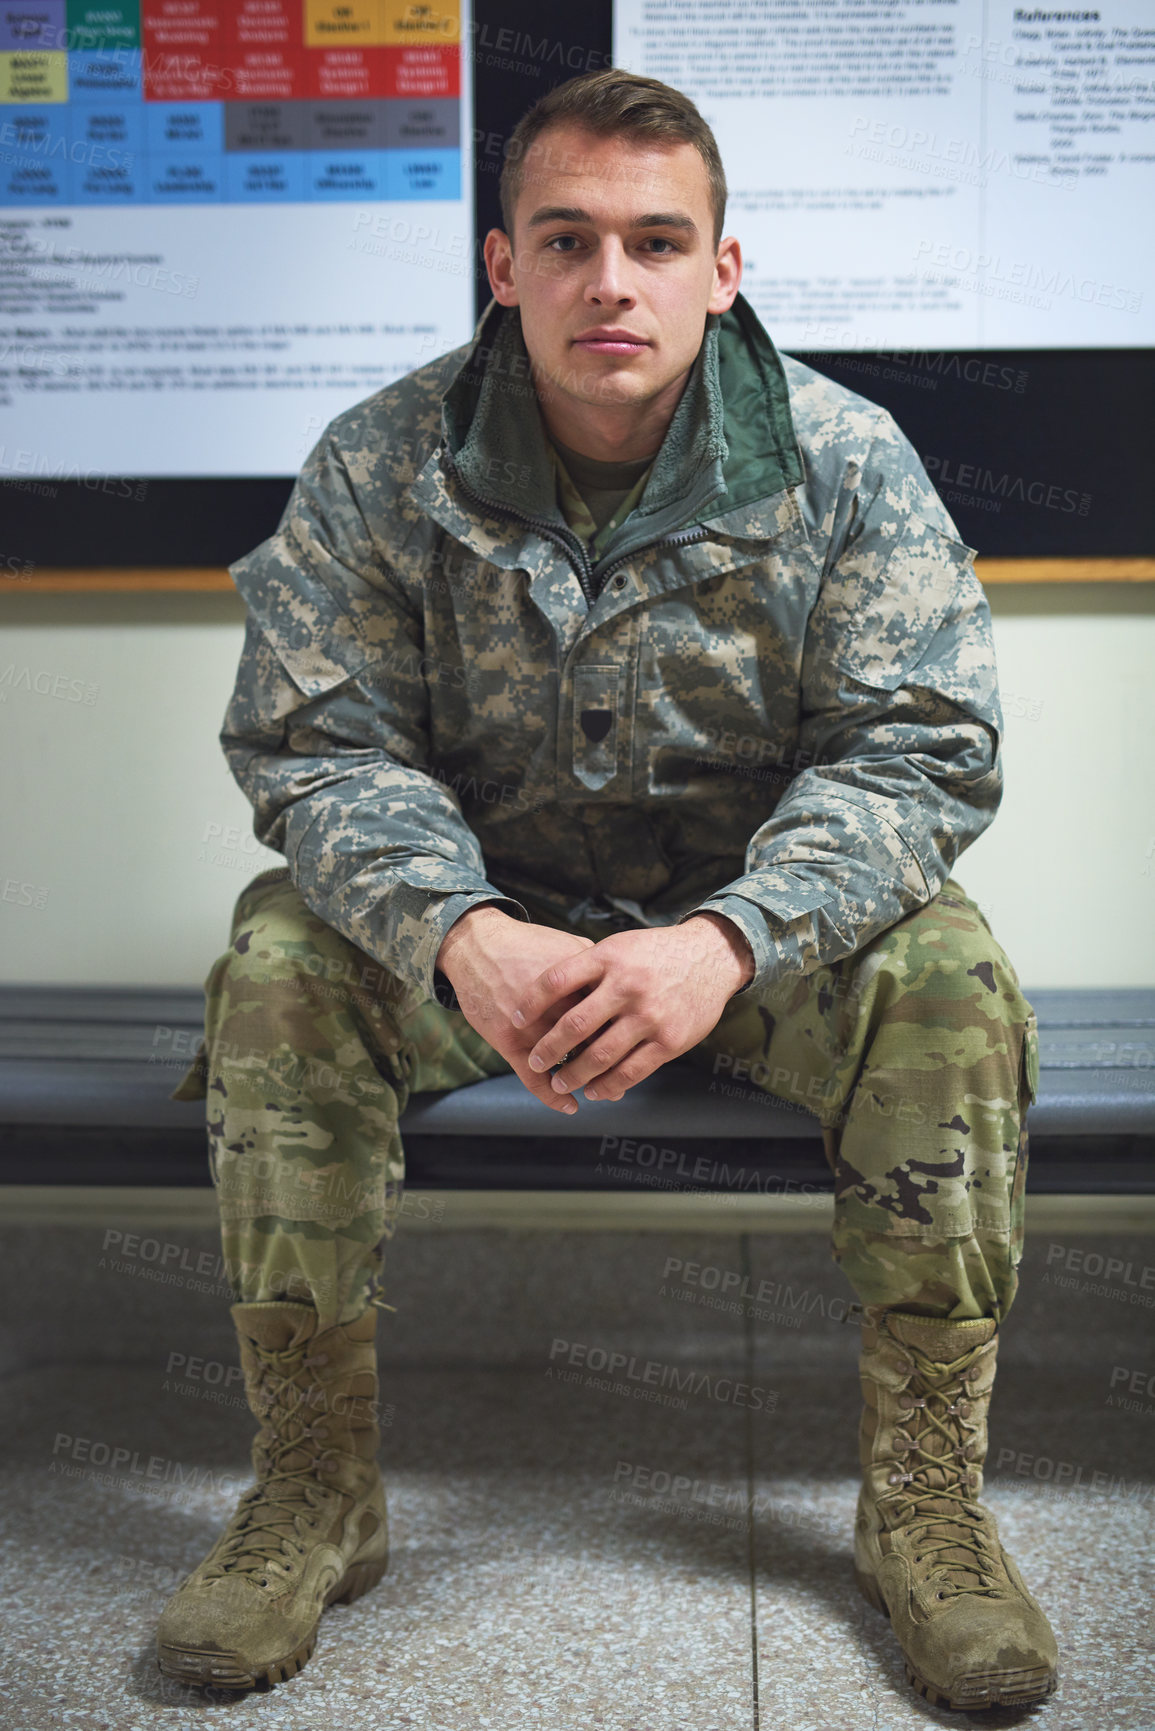 Buy stock photo Shot of a young soldier sitting on a bench in the hall of a military academy